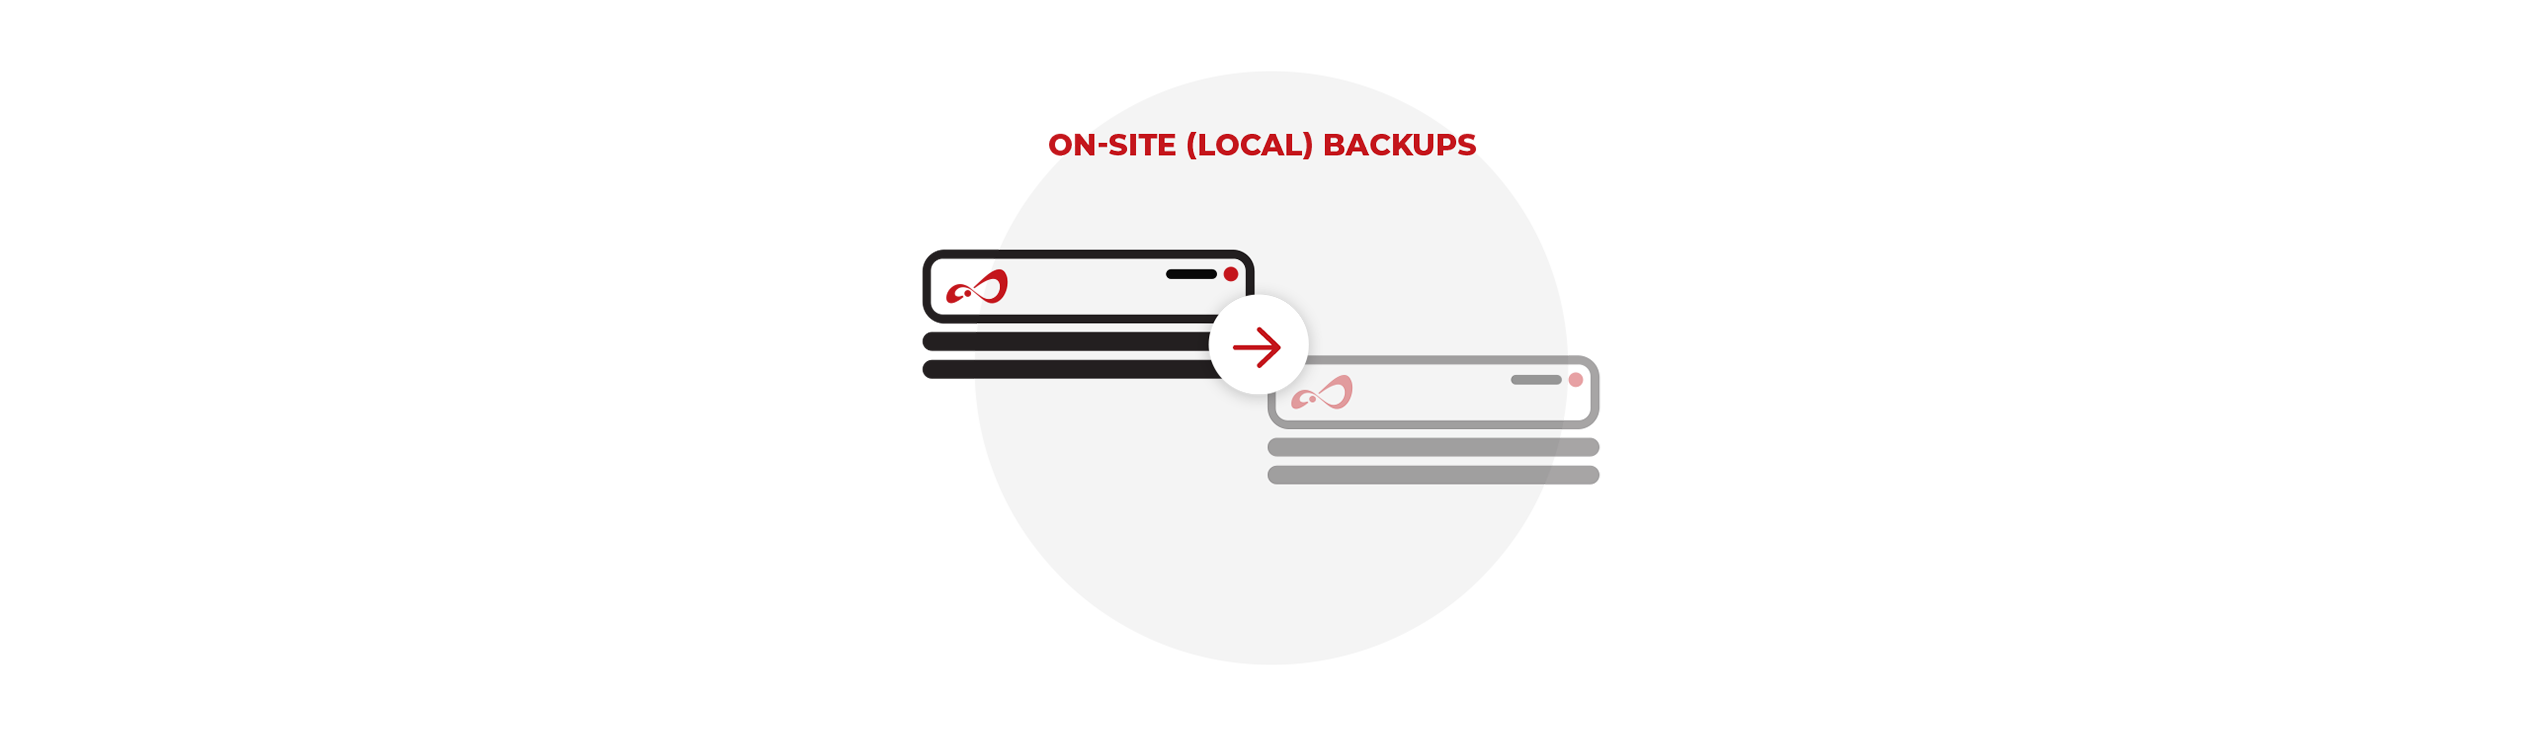 Open-E JovianDSS On-site Data Protection local backup graphic